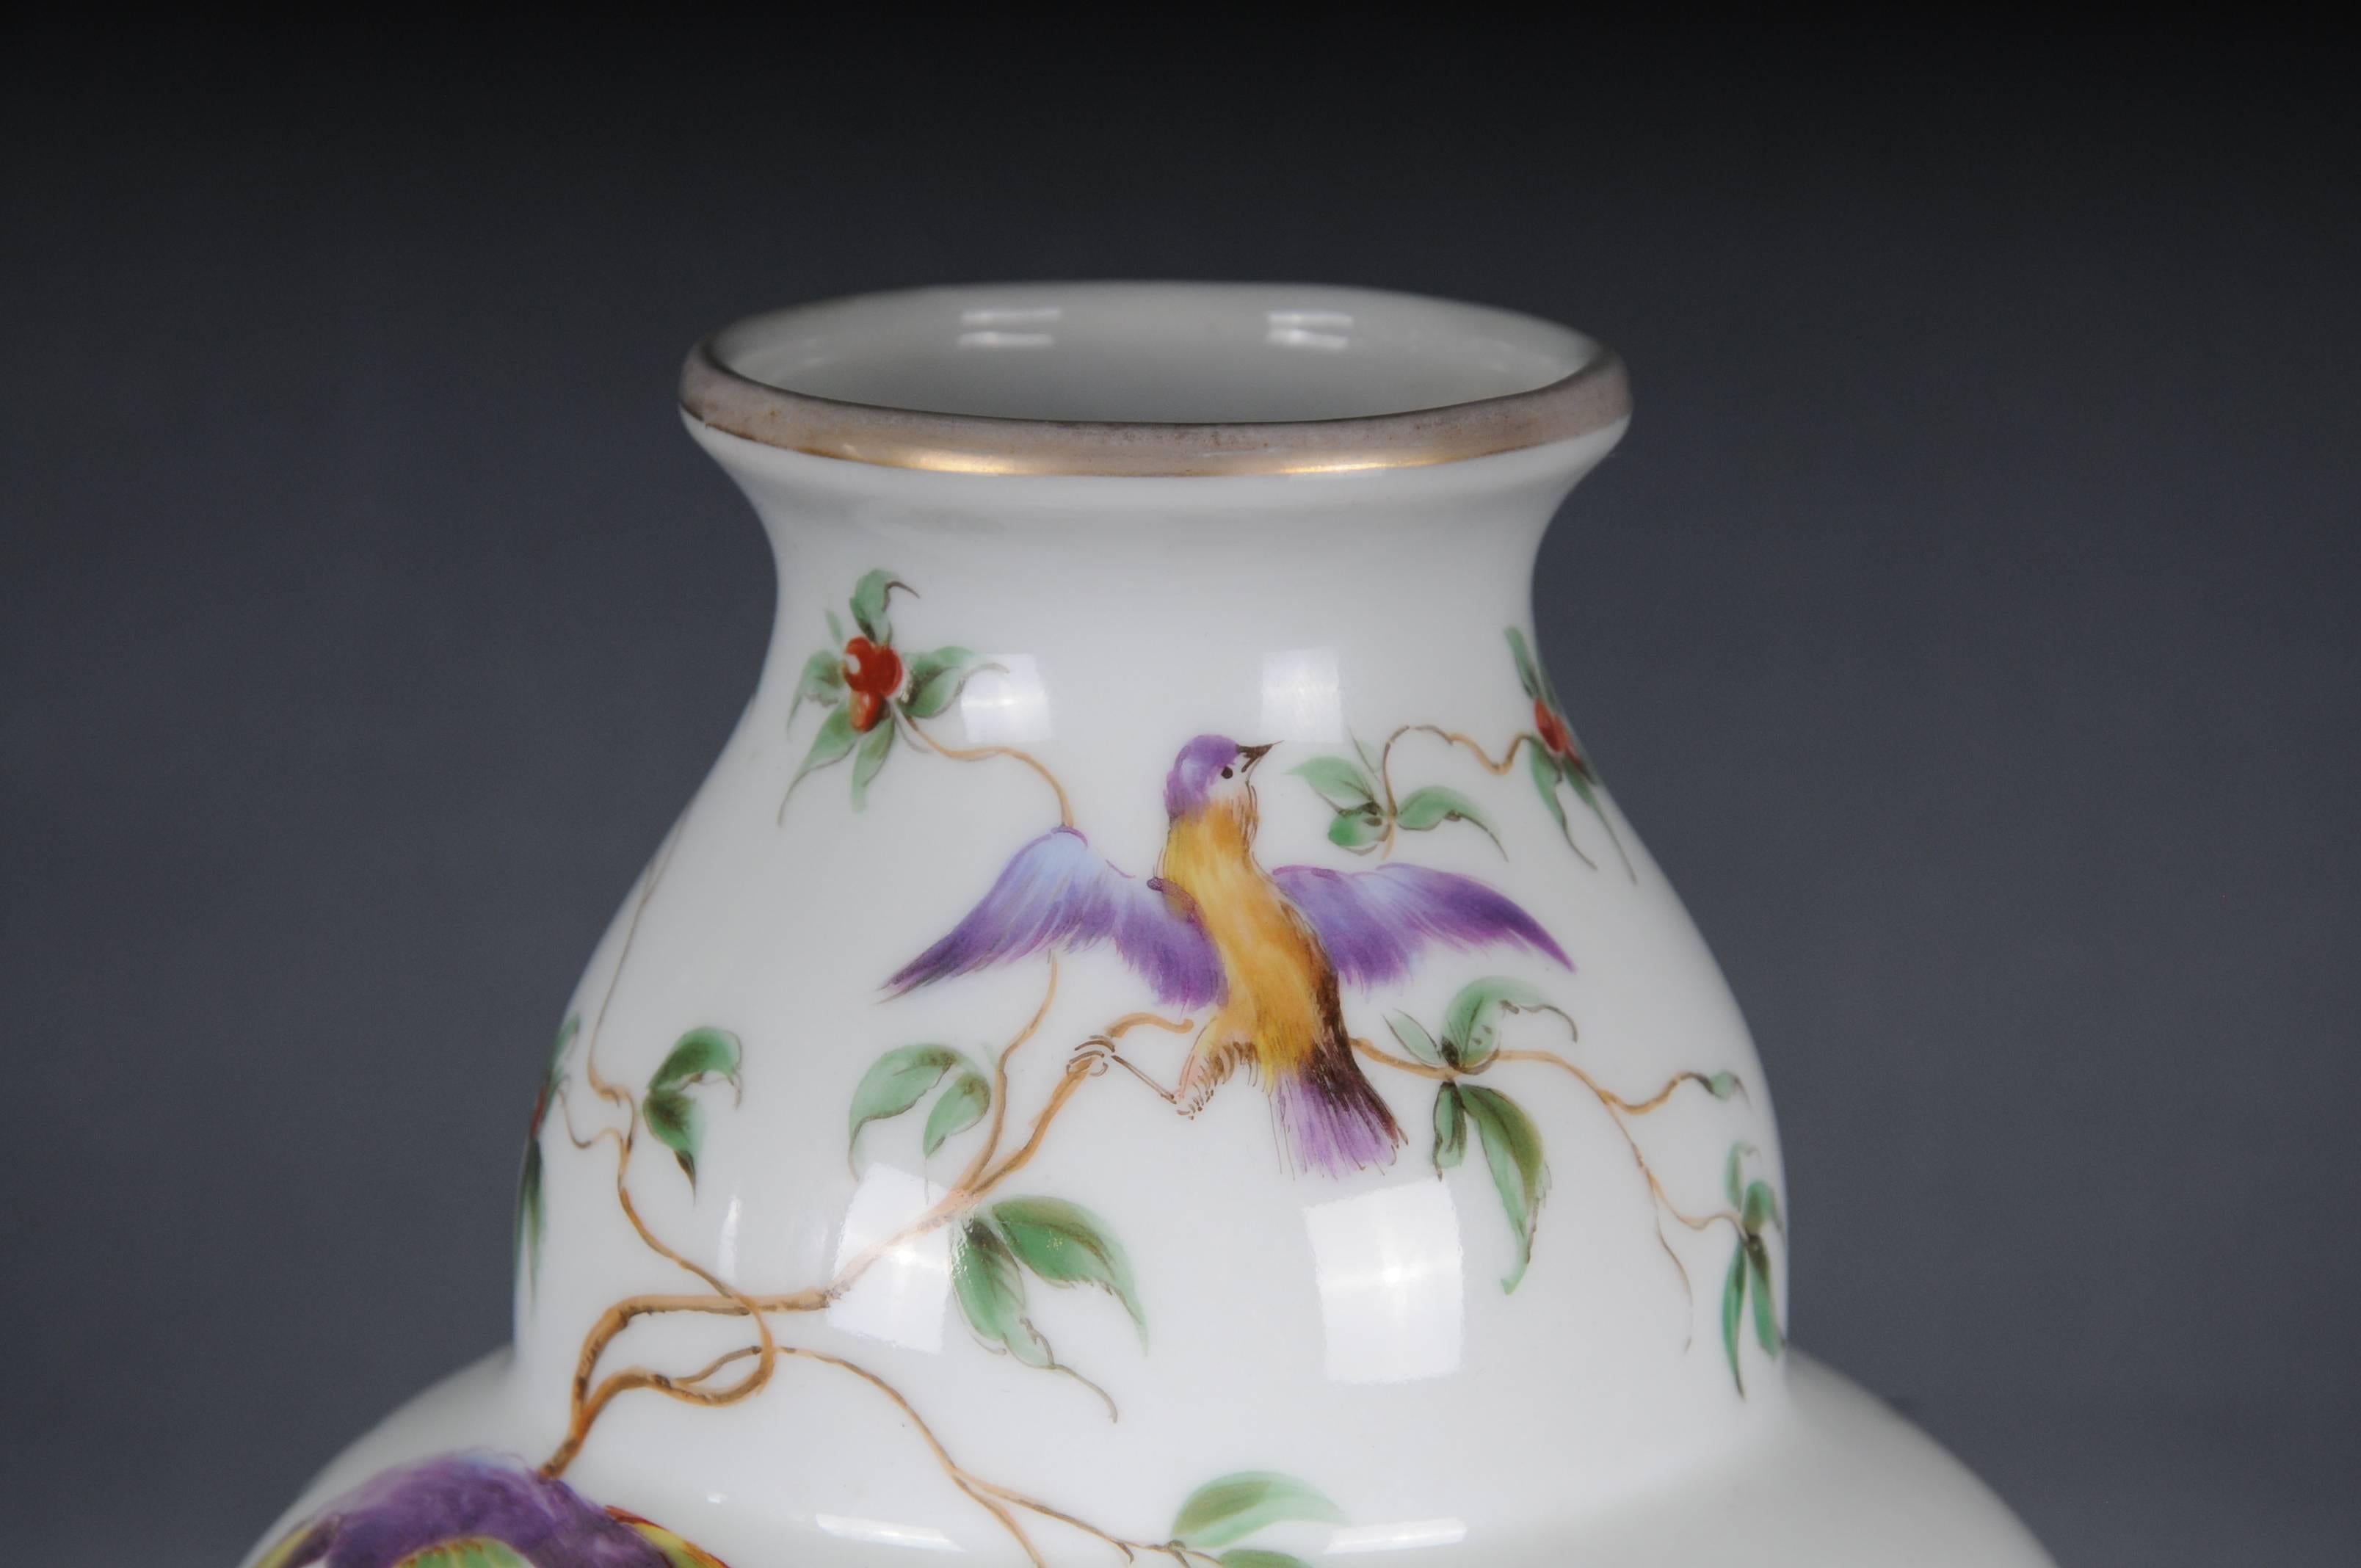 The most unusual Ludwigsburg vase with rare painting. Exceptional form.
Original Ludwigsburg not marked.
Undamaged condition.